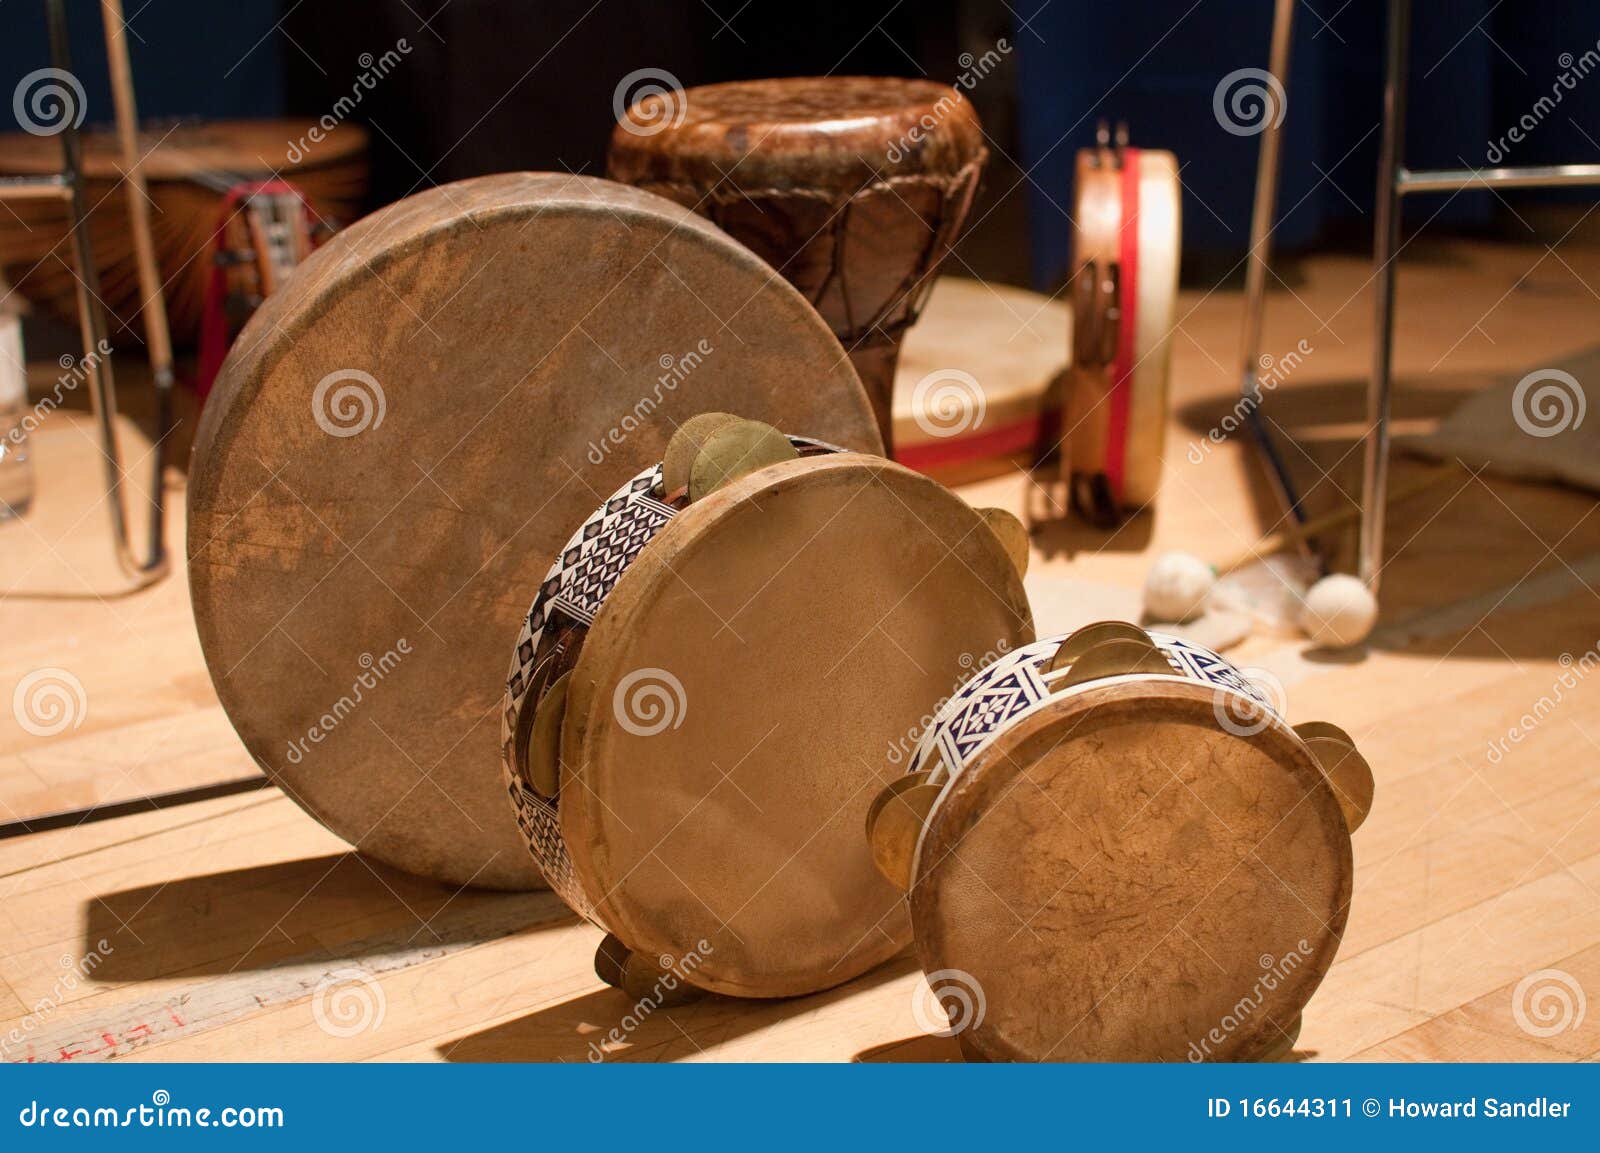 traditional percussion instruments